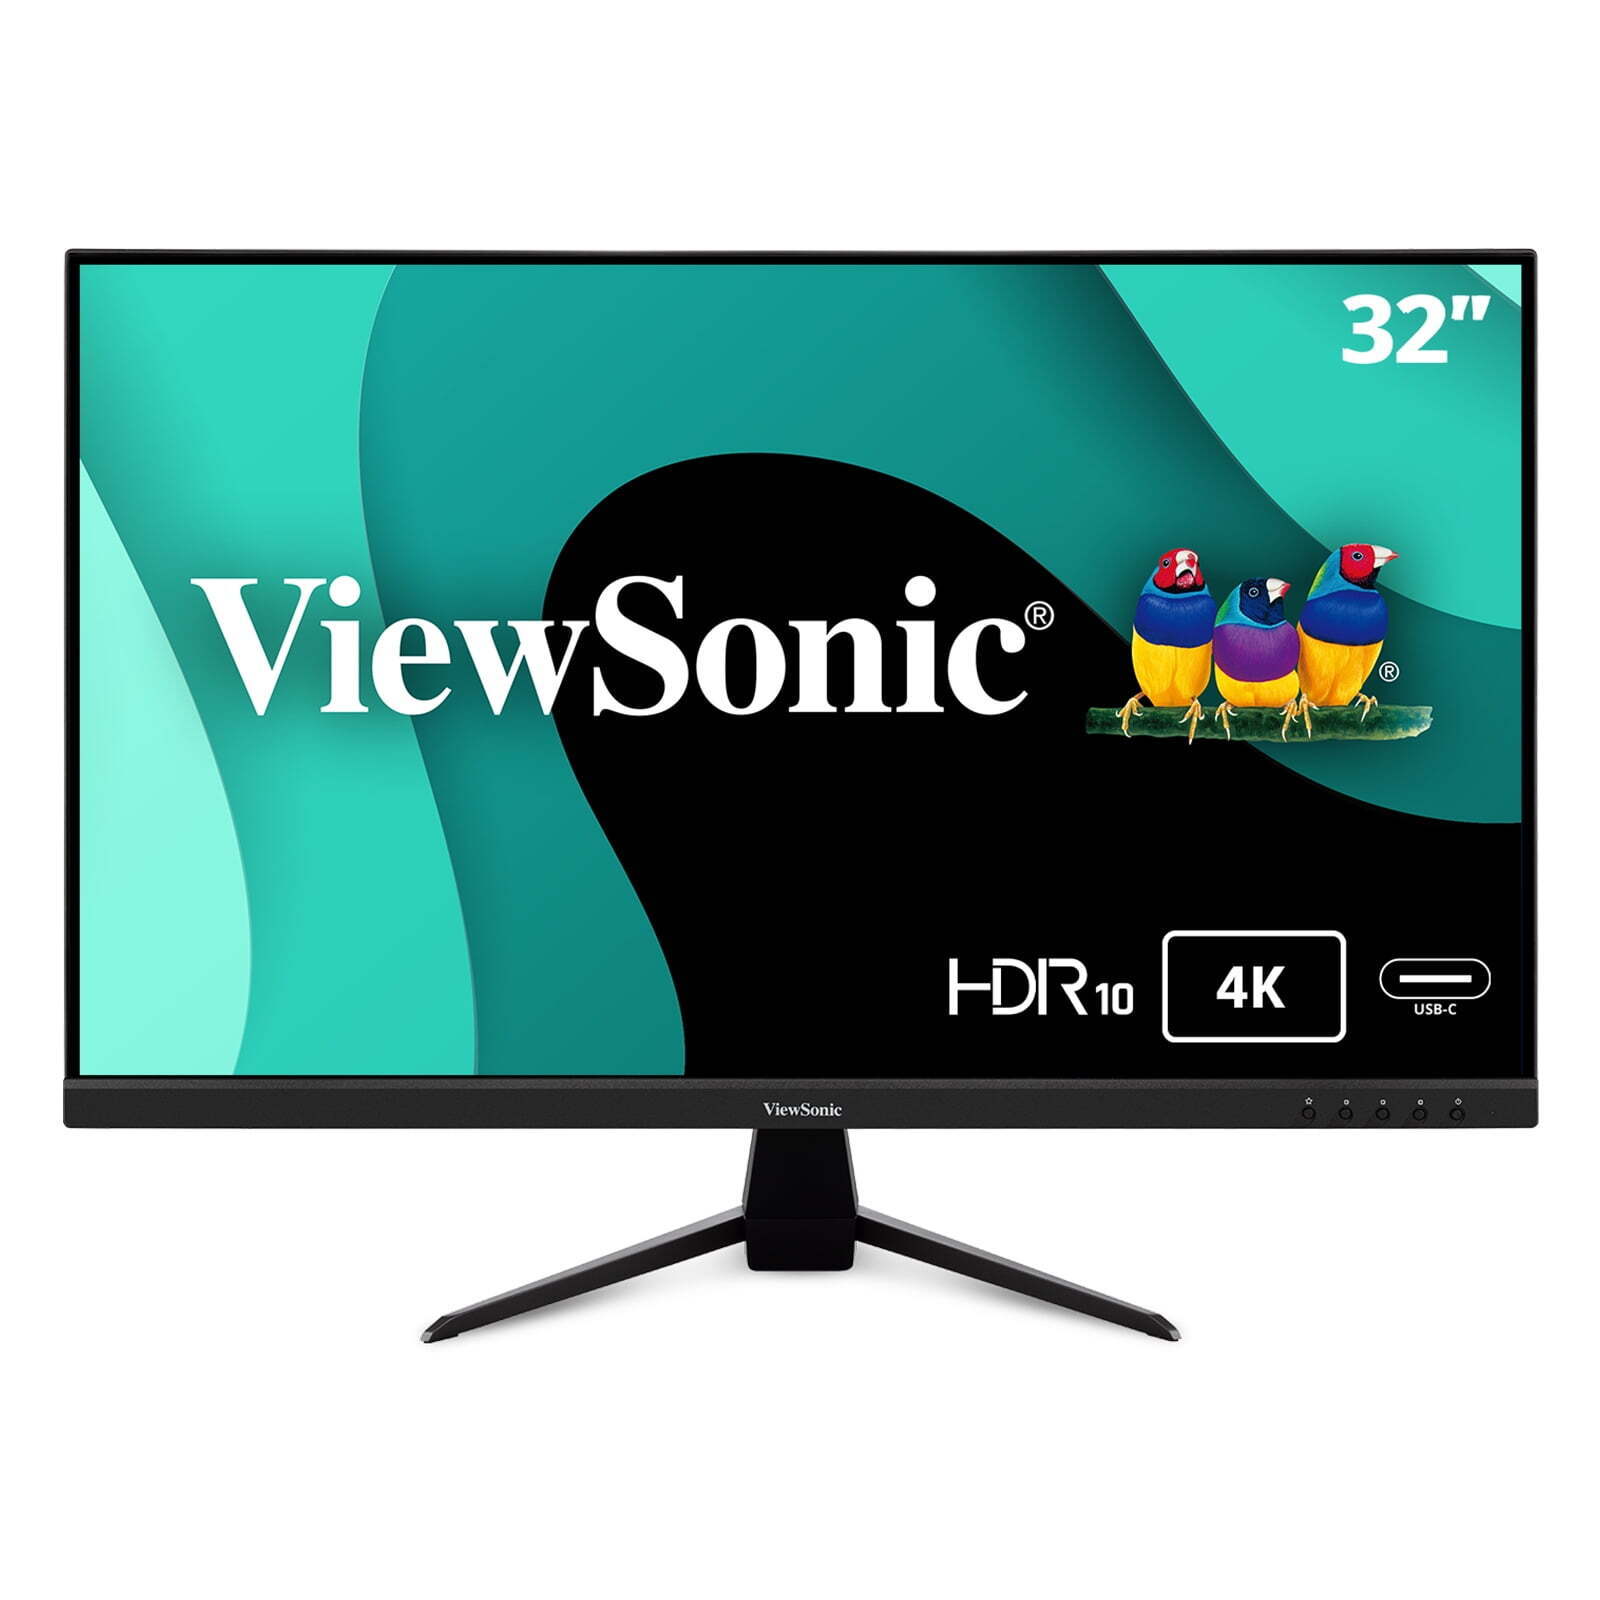 ViewSonic VX3267U-4K 4K UHD 32 Inch IPS Monitor with 65W USB C, HDR10 Content